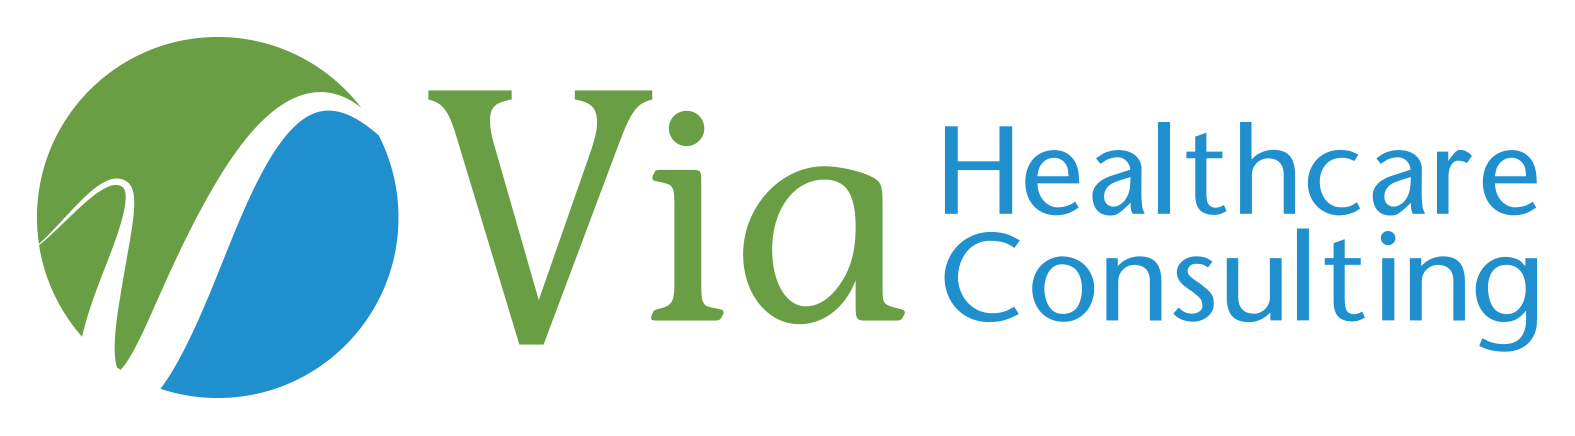 Image of Via Healthcare Consulting Logo